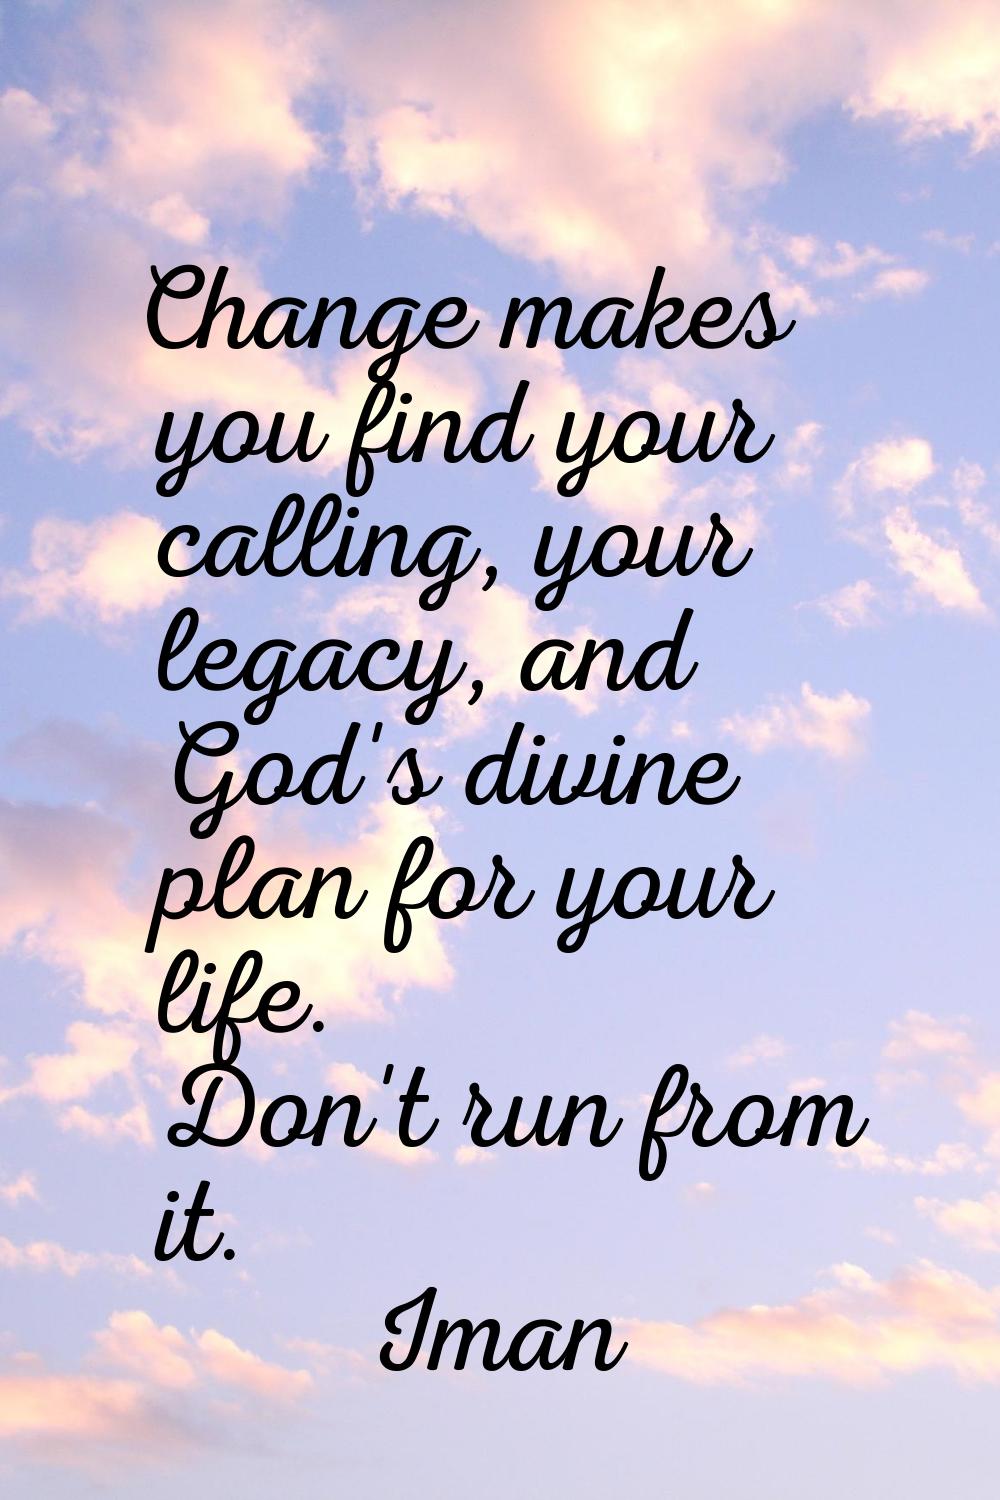 Change makes you find your calling, your legacy, and God's divine plan for your life. Don't run fro